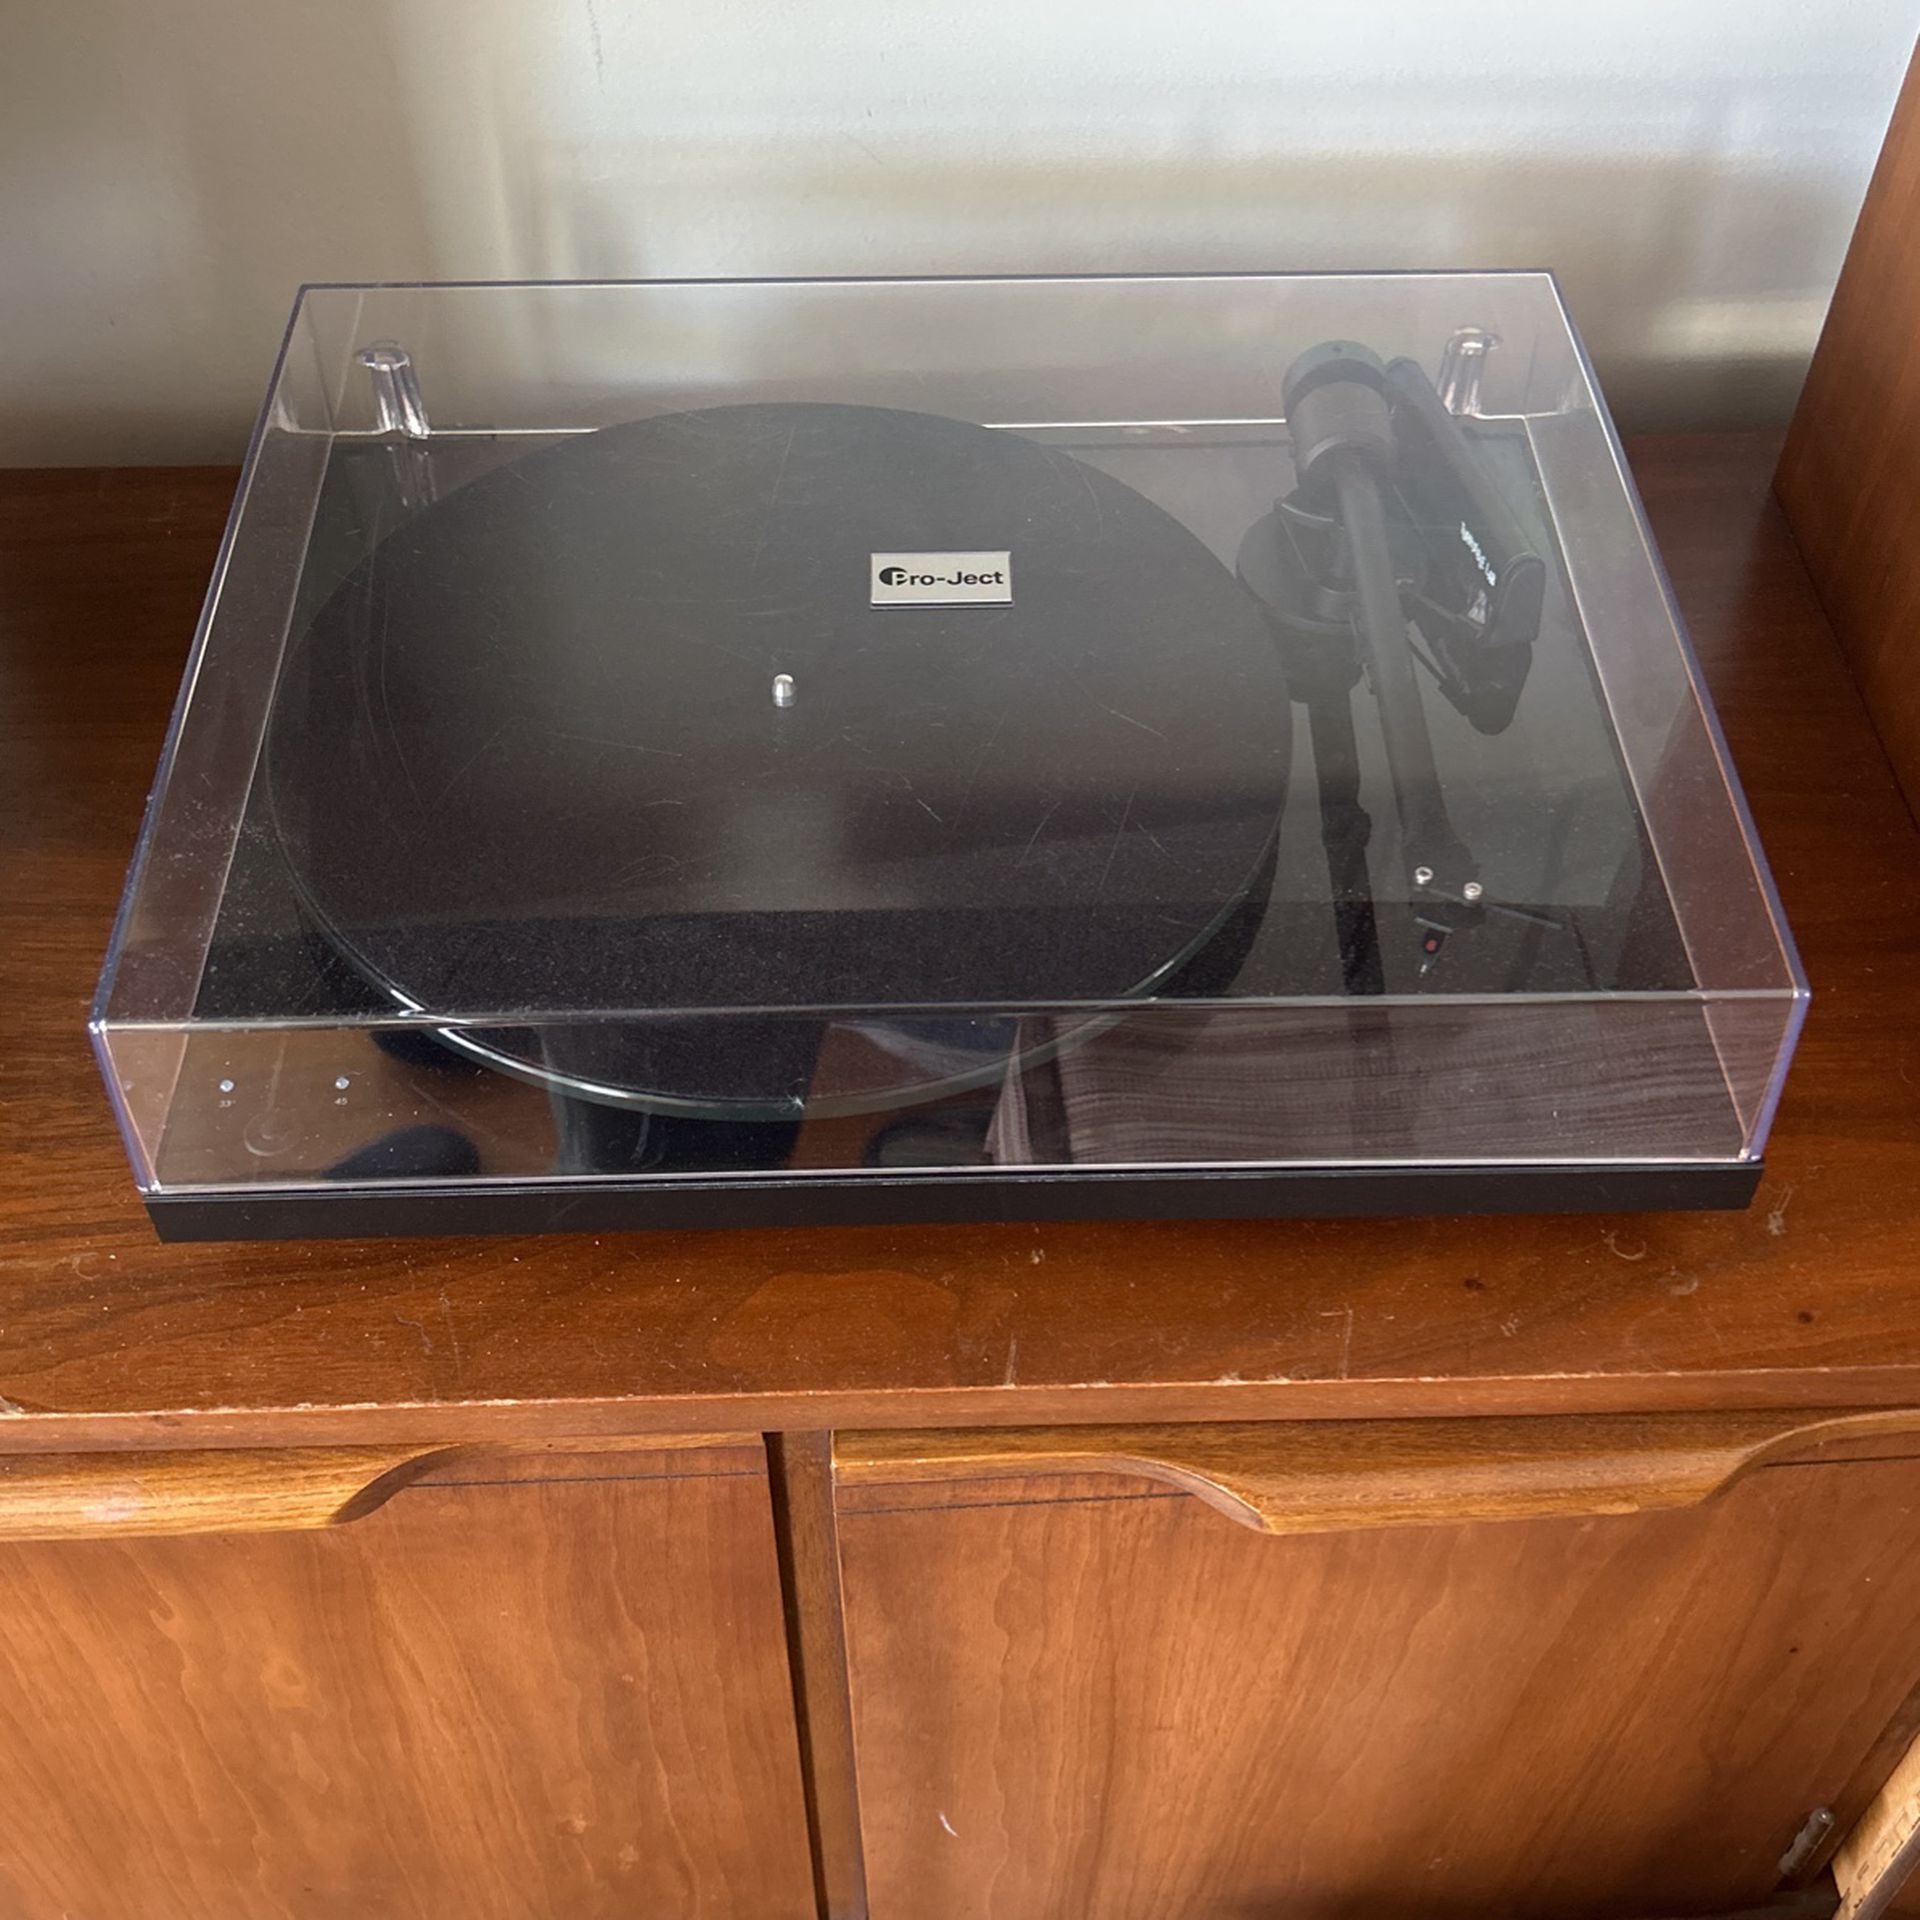 Pro-Ject Record Player